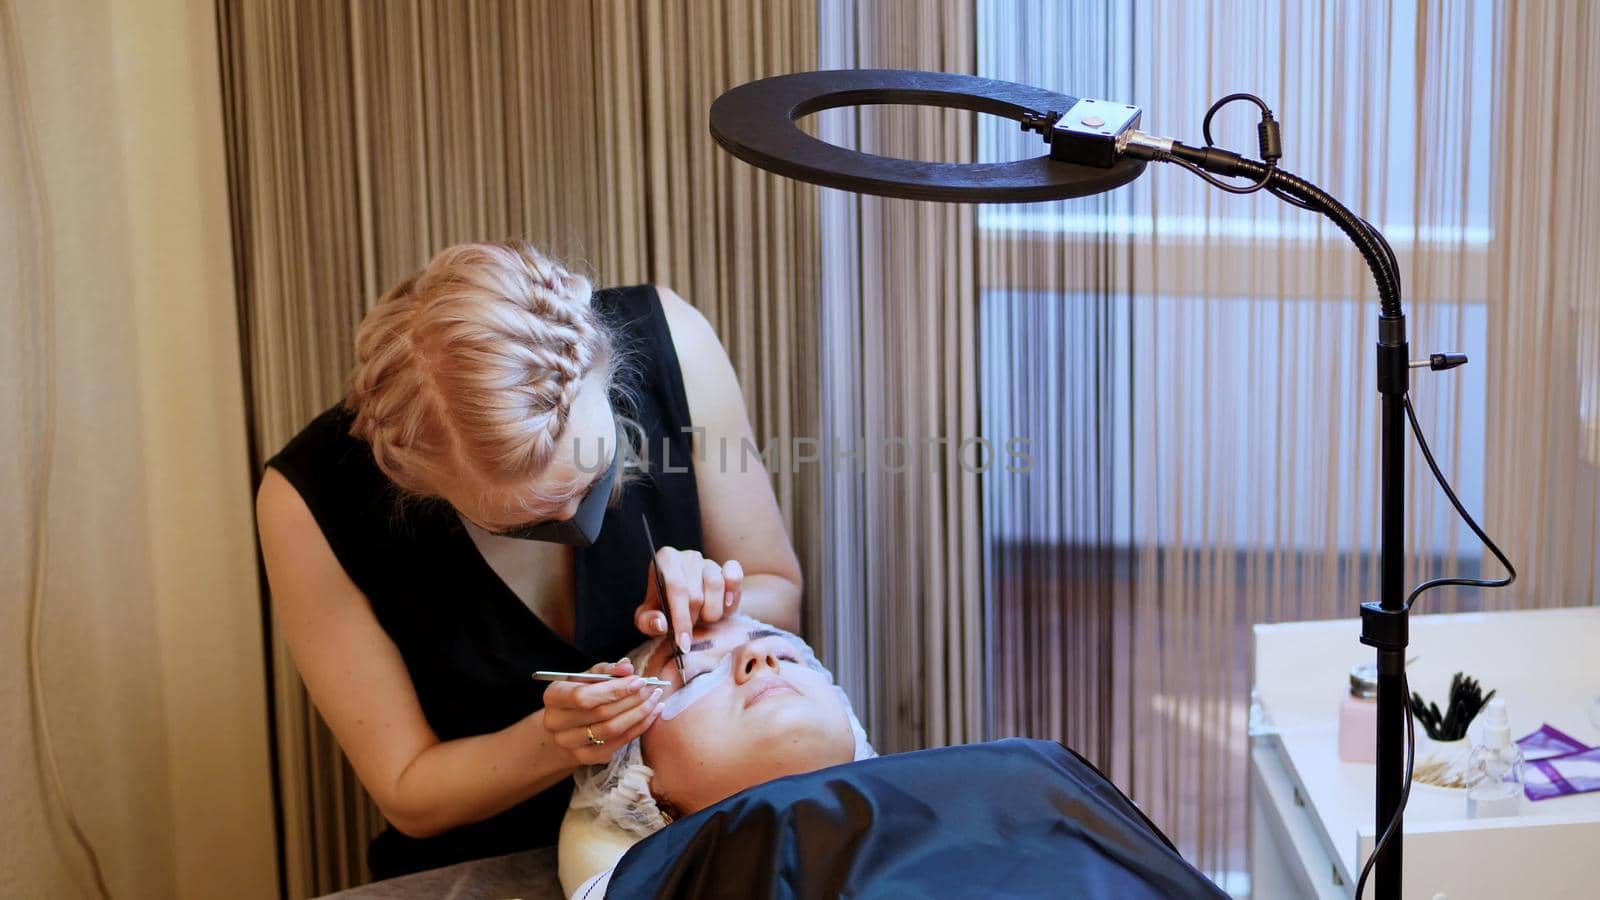 beauty saloon. procedure for eyelash extension. The master in the bandage on the face, glues each cilium with special glue, works by means of two tweezers. High quality photo